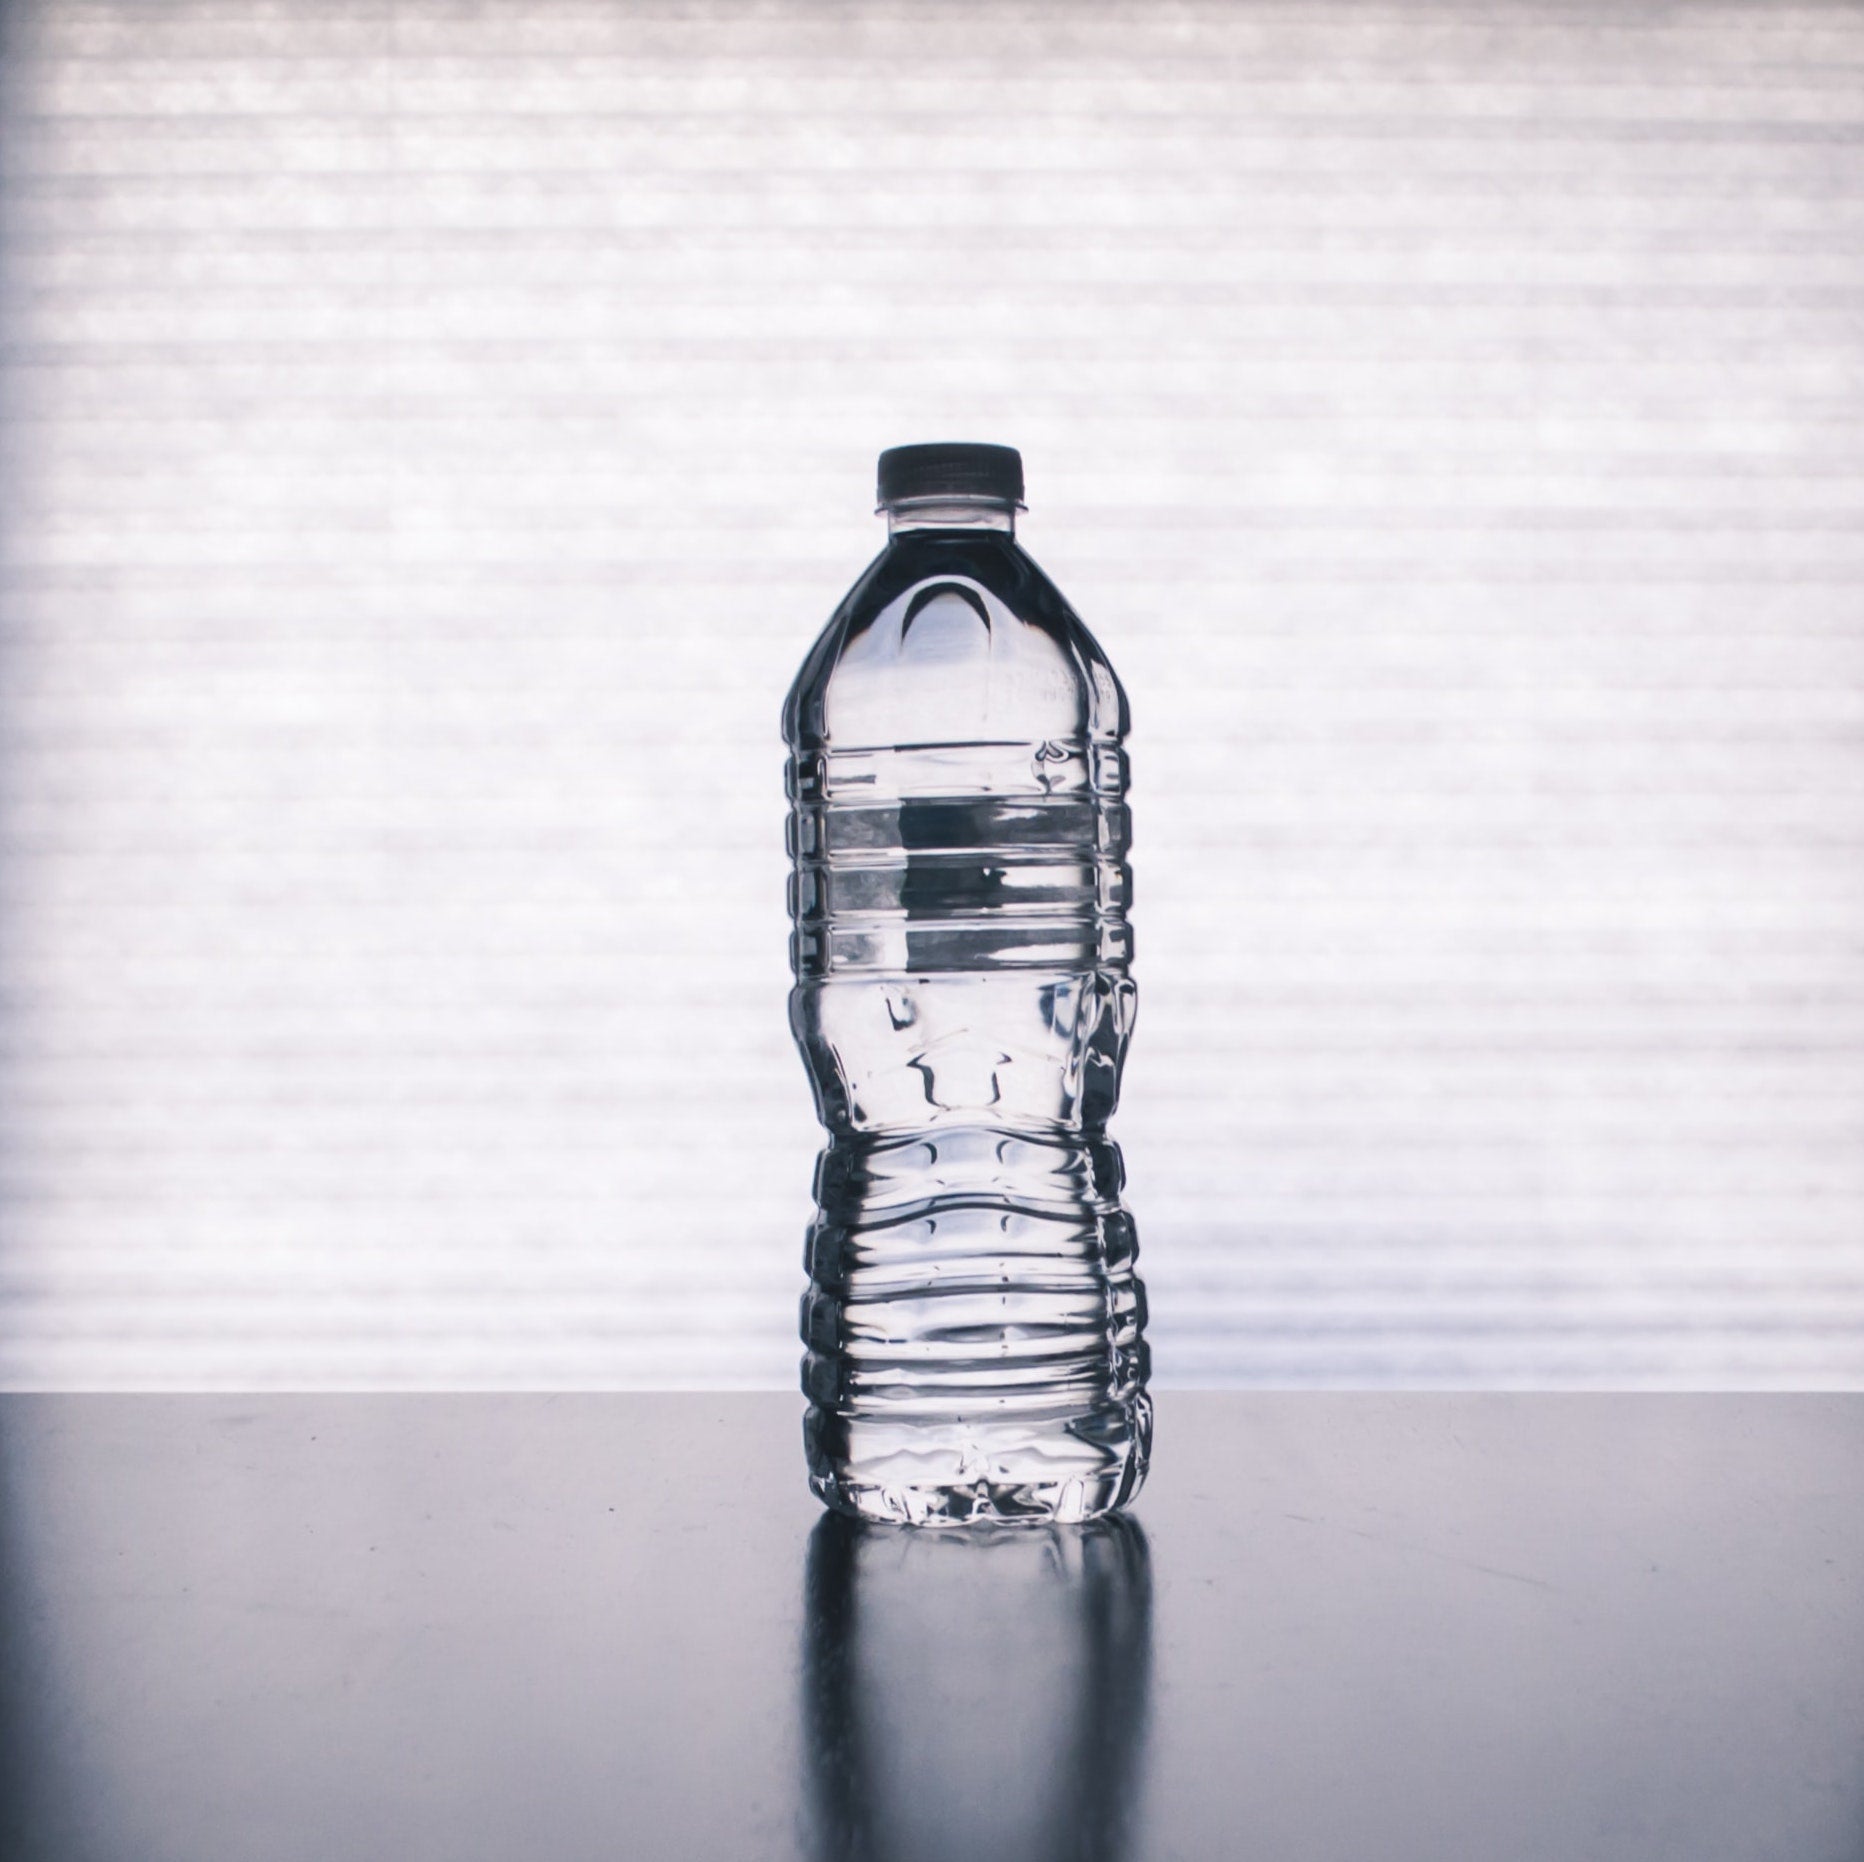 plastic water bottle sitting on glossy table casting reflection